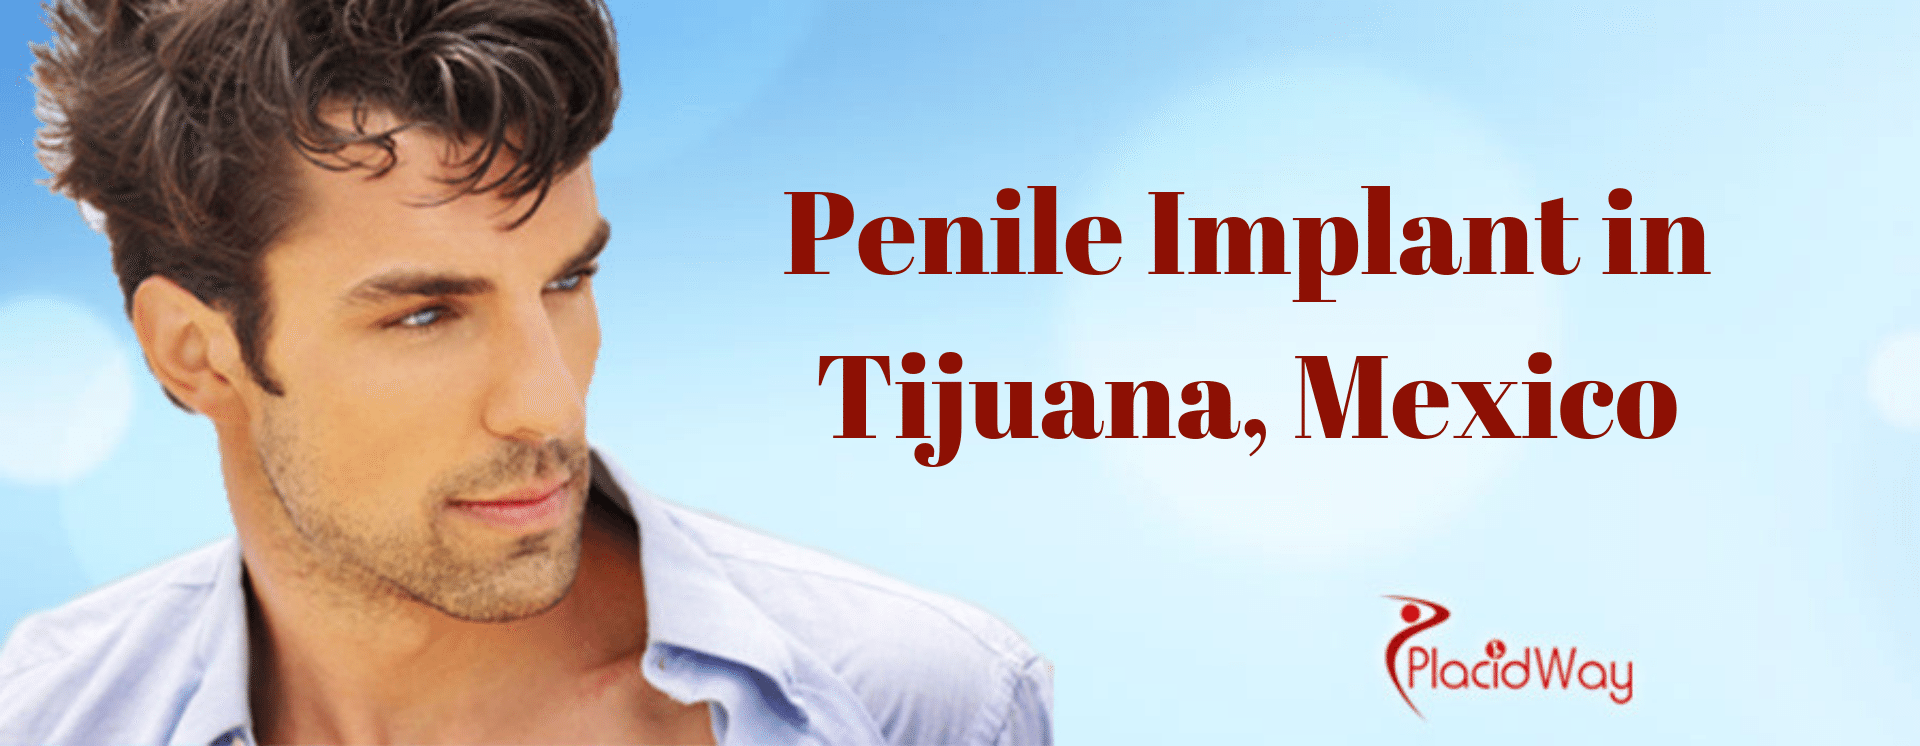 What is the Average Price for Penile Implant in Tijuana, Mexico?